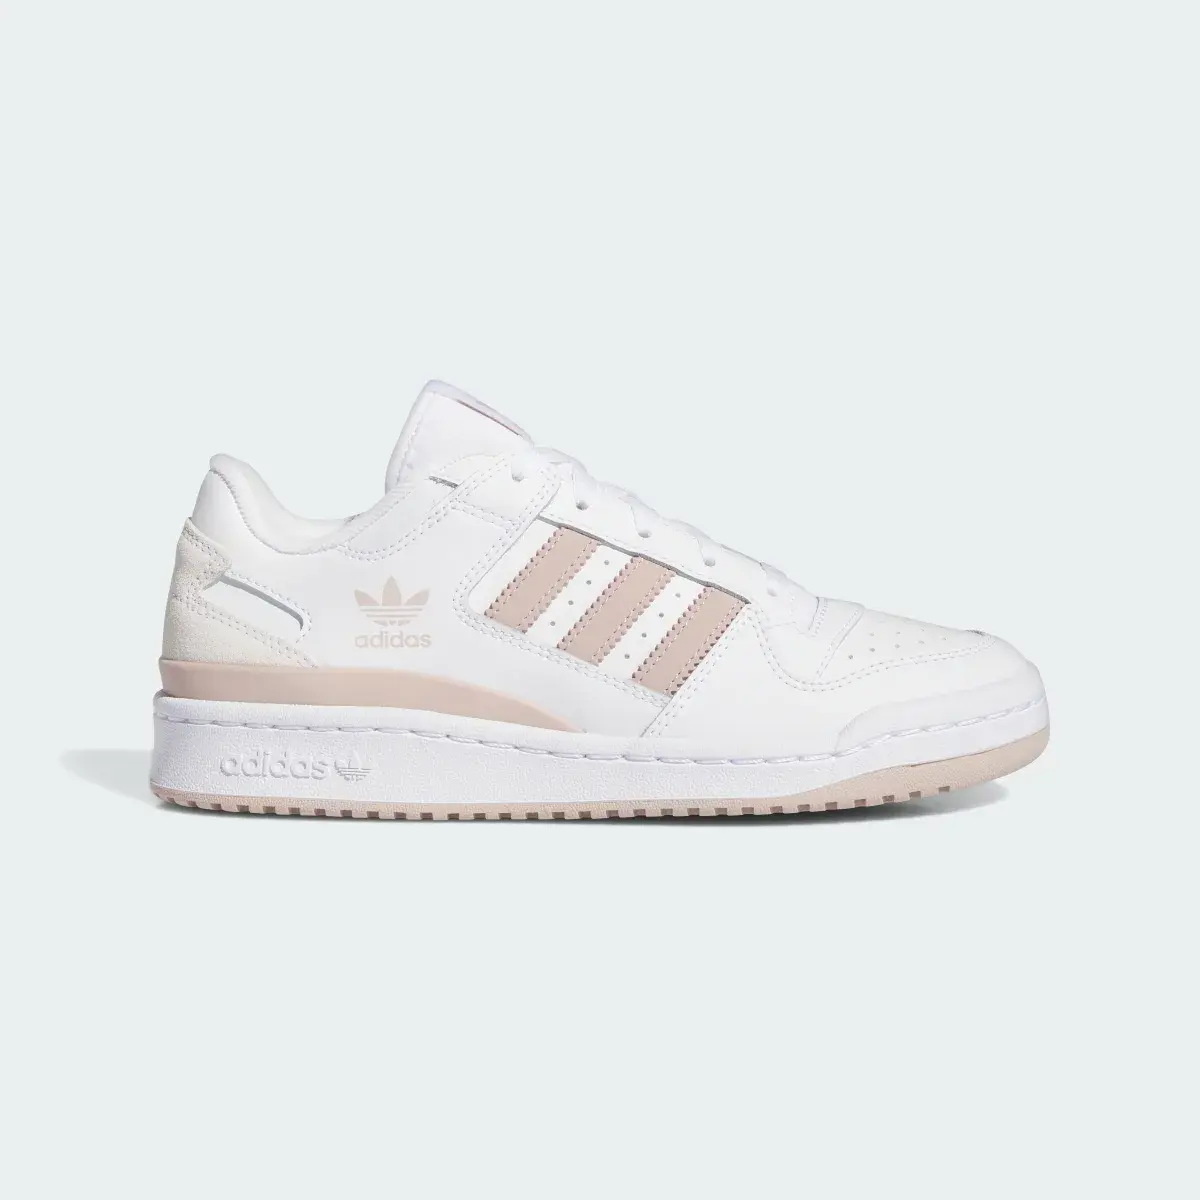 Adidas Forum Low Shoes. 2